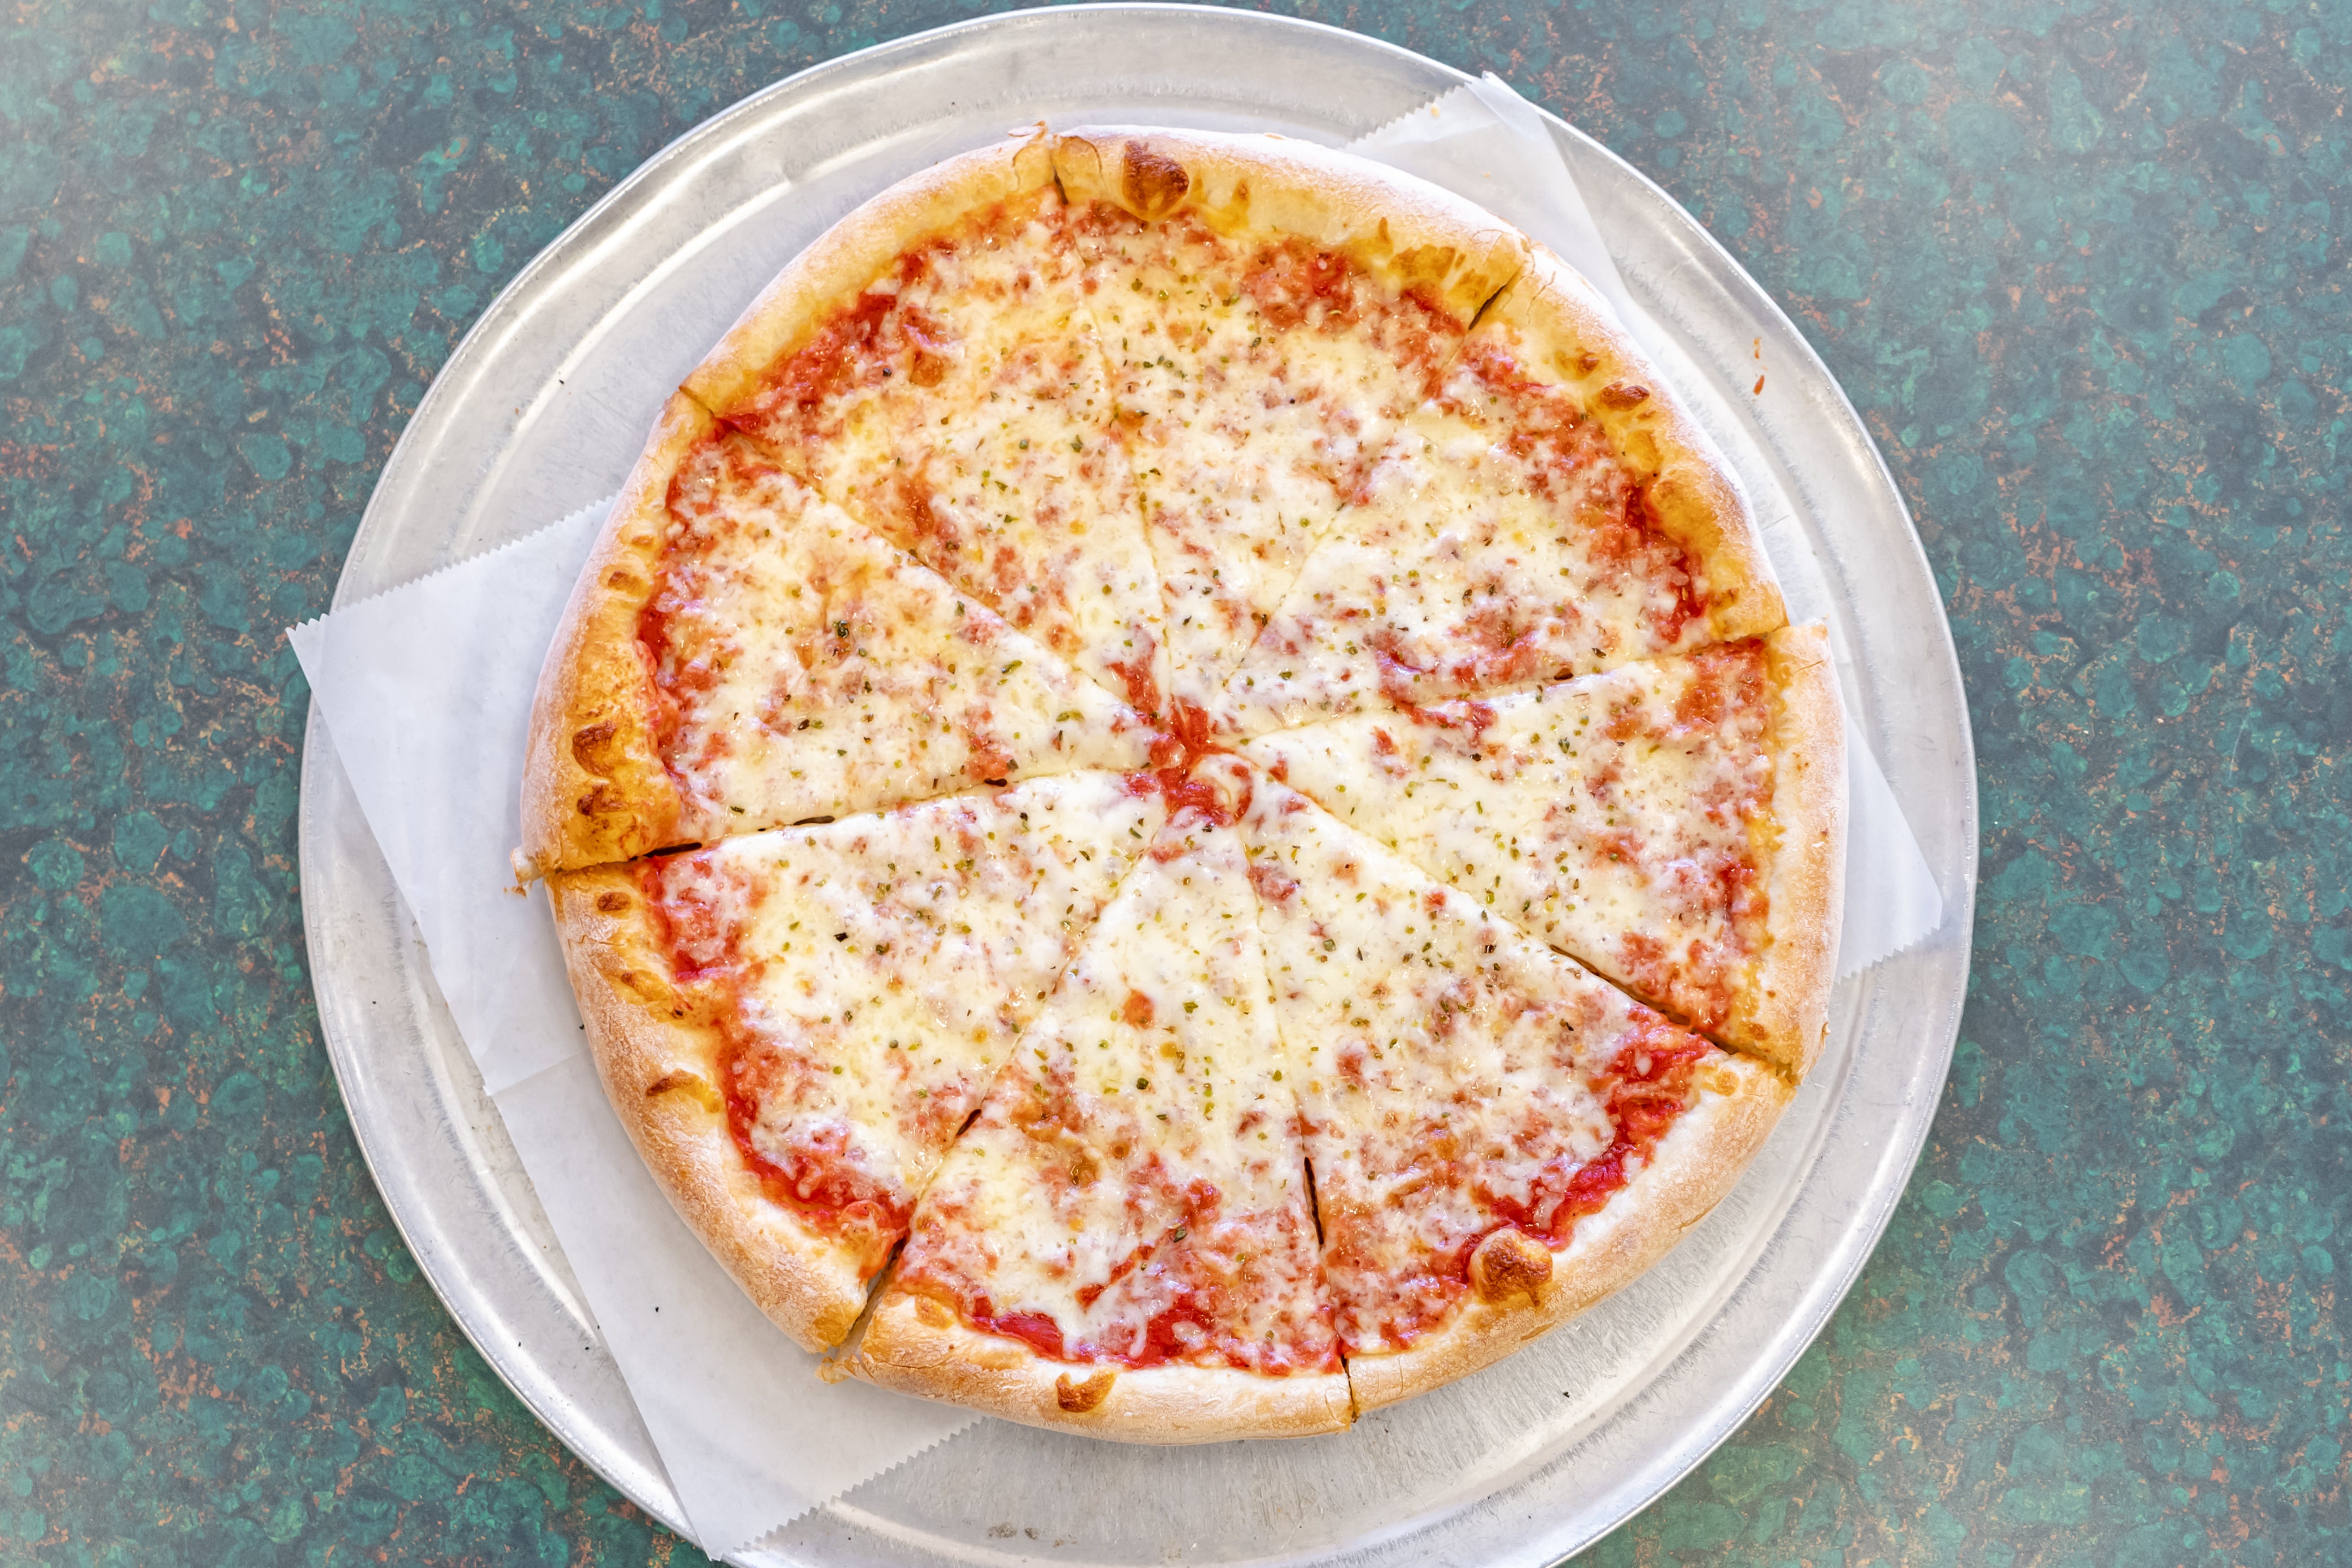 IV. Market Trends and Analysis of the Frozen Pizza Industry